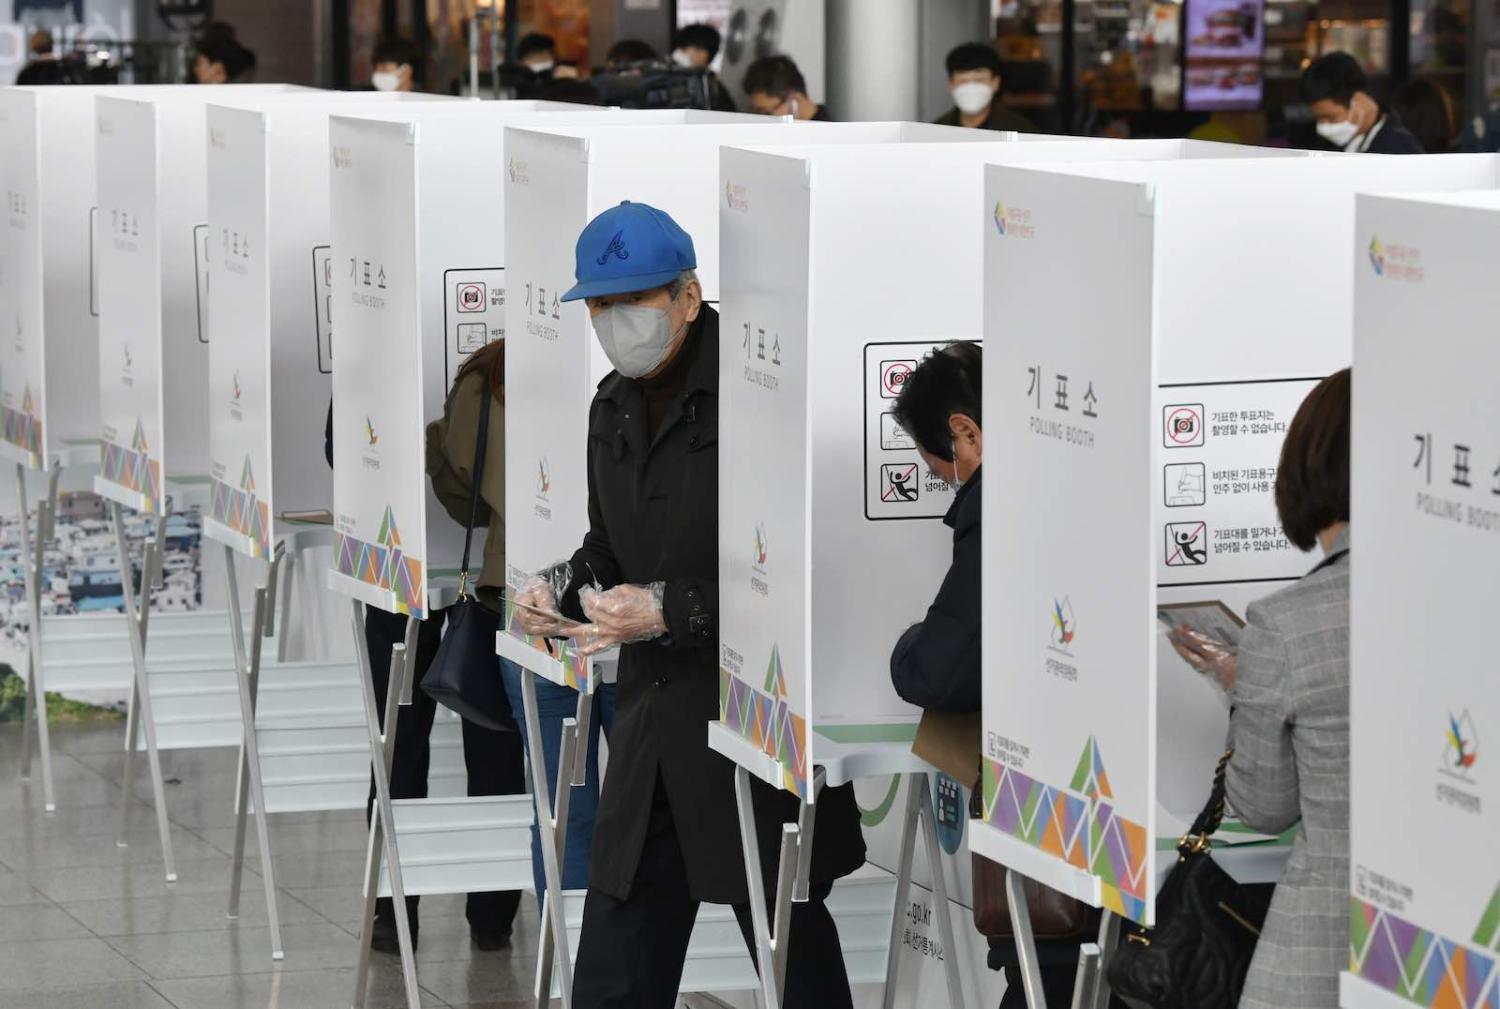 Early voting at a polling station in Seoul on 10 April ahead of next week's parliamentary elections (Jung Yeon-je/AFP/Getty Images)